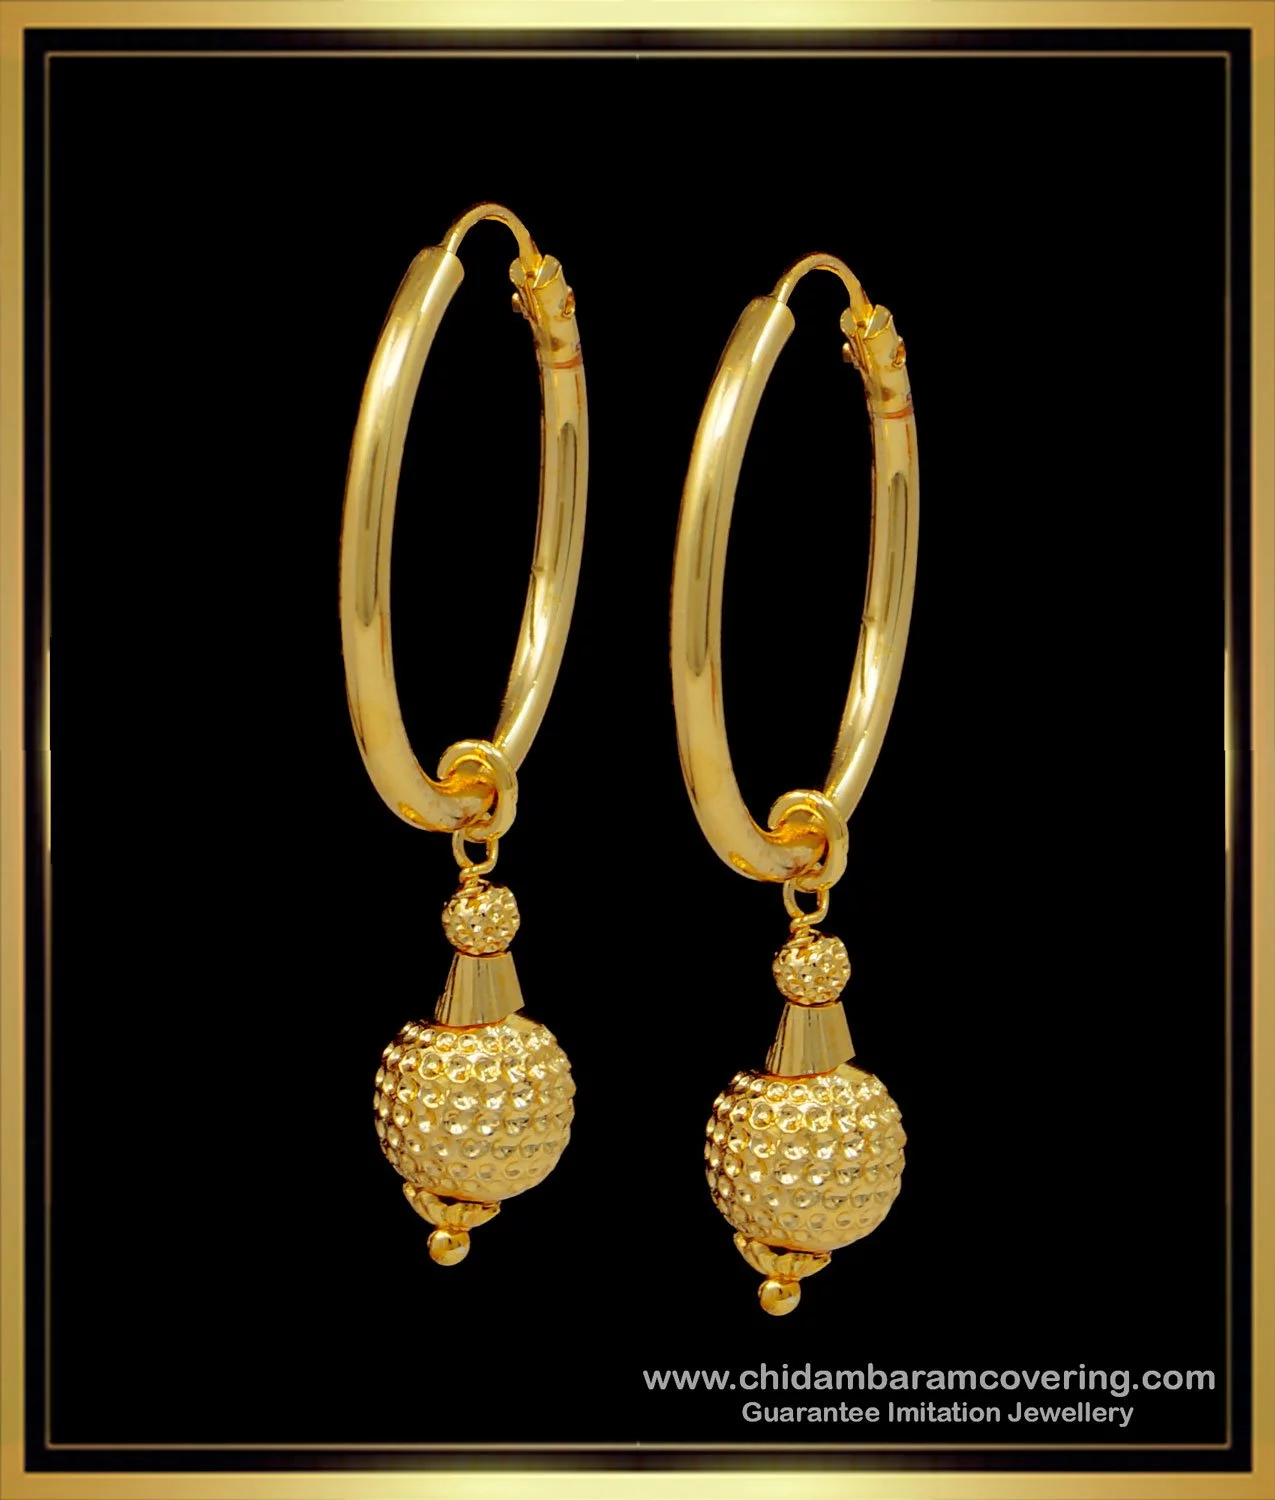 Amazon.com: Dolland Leaf Small Circle Earrings Round Ring Shape Vintage  Rhinestones Small Hoop Earrings,Golden : Clothing, Shoes & Jewelry